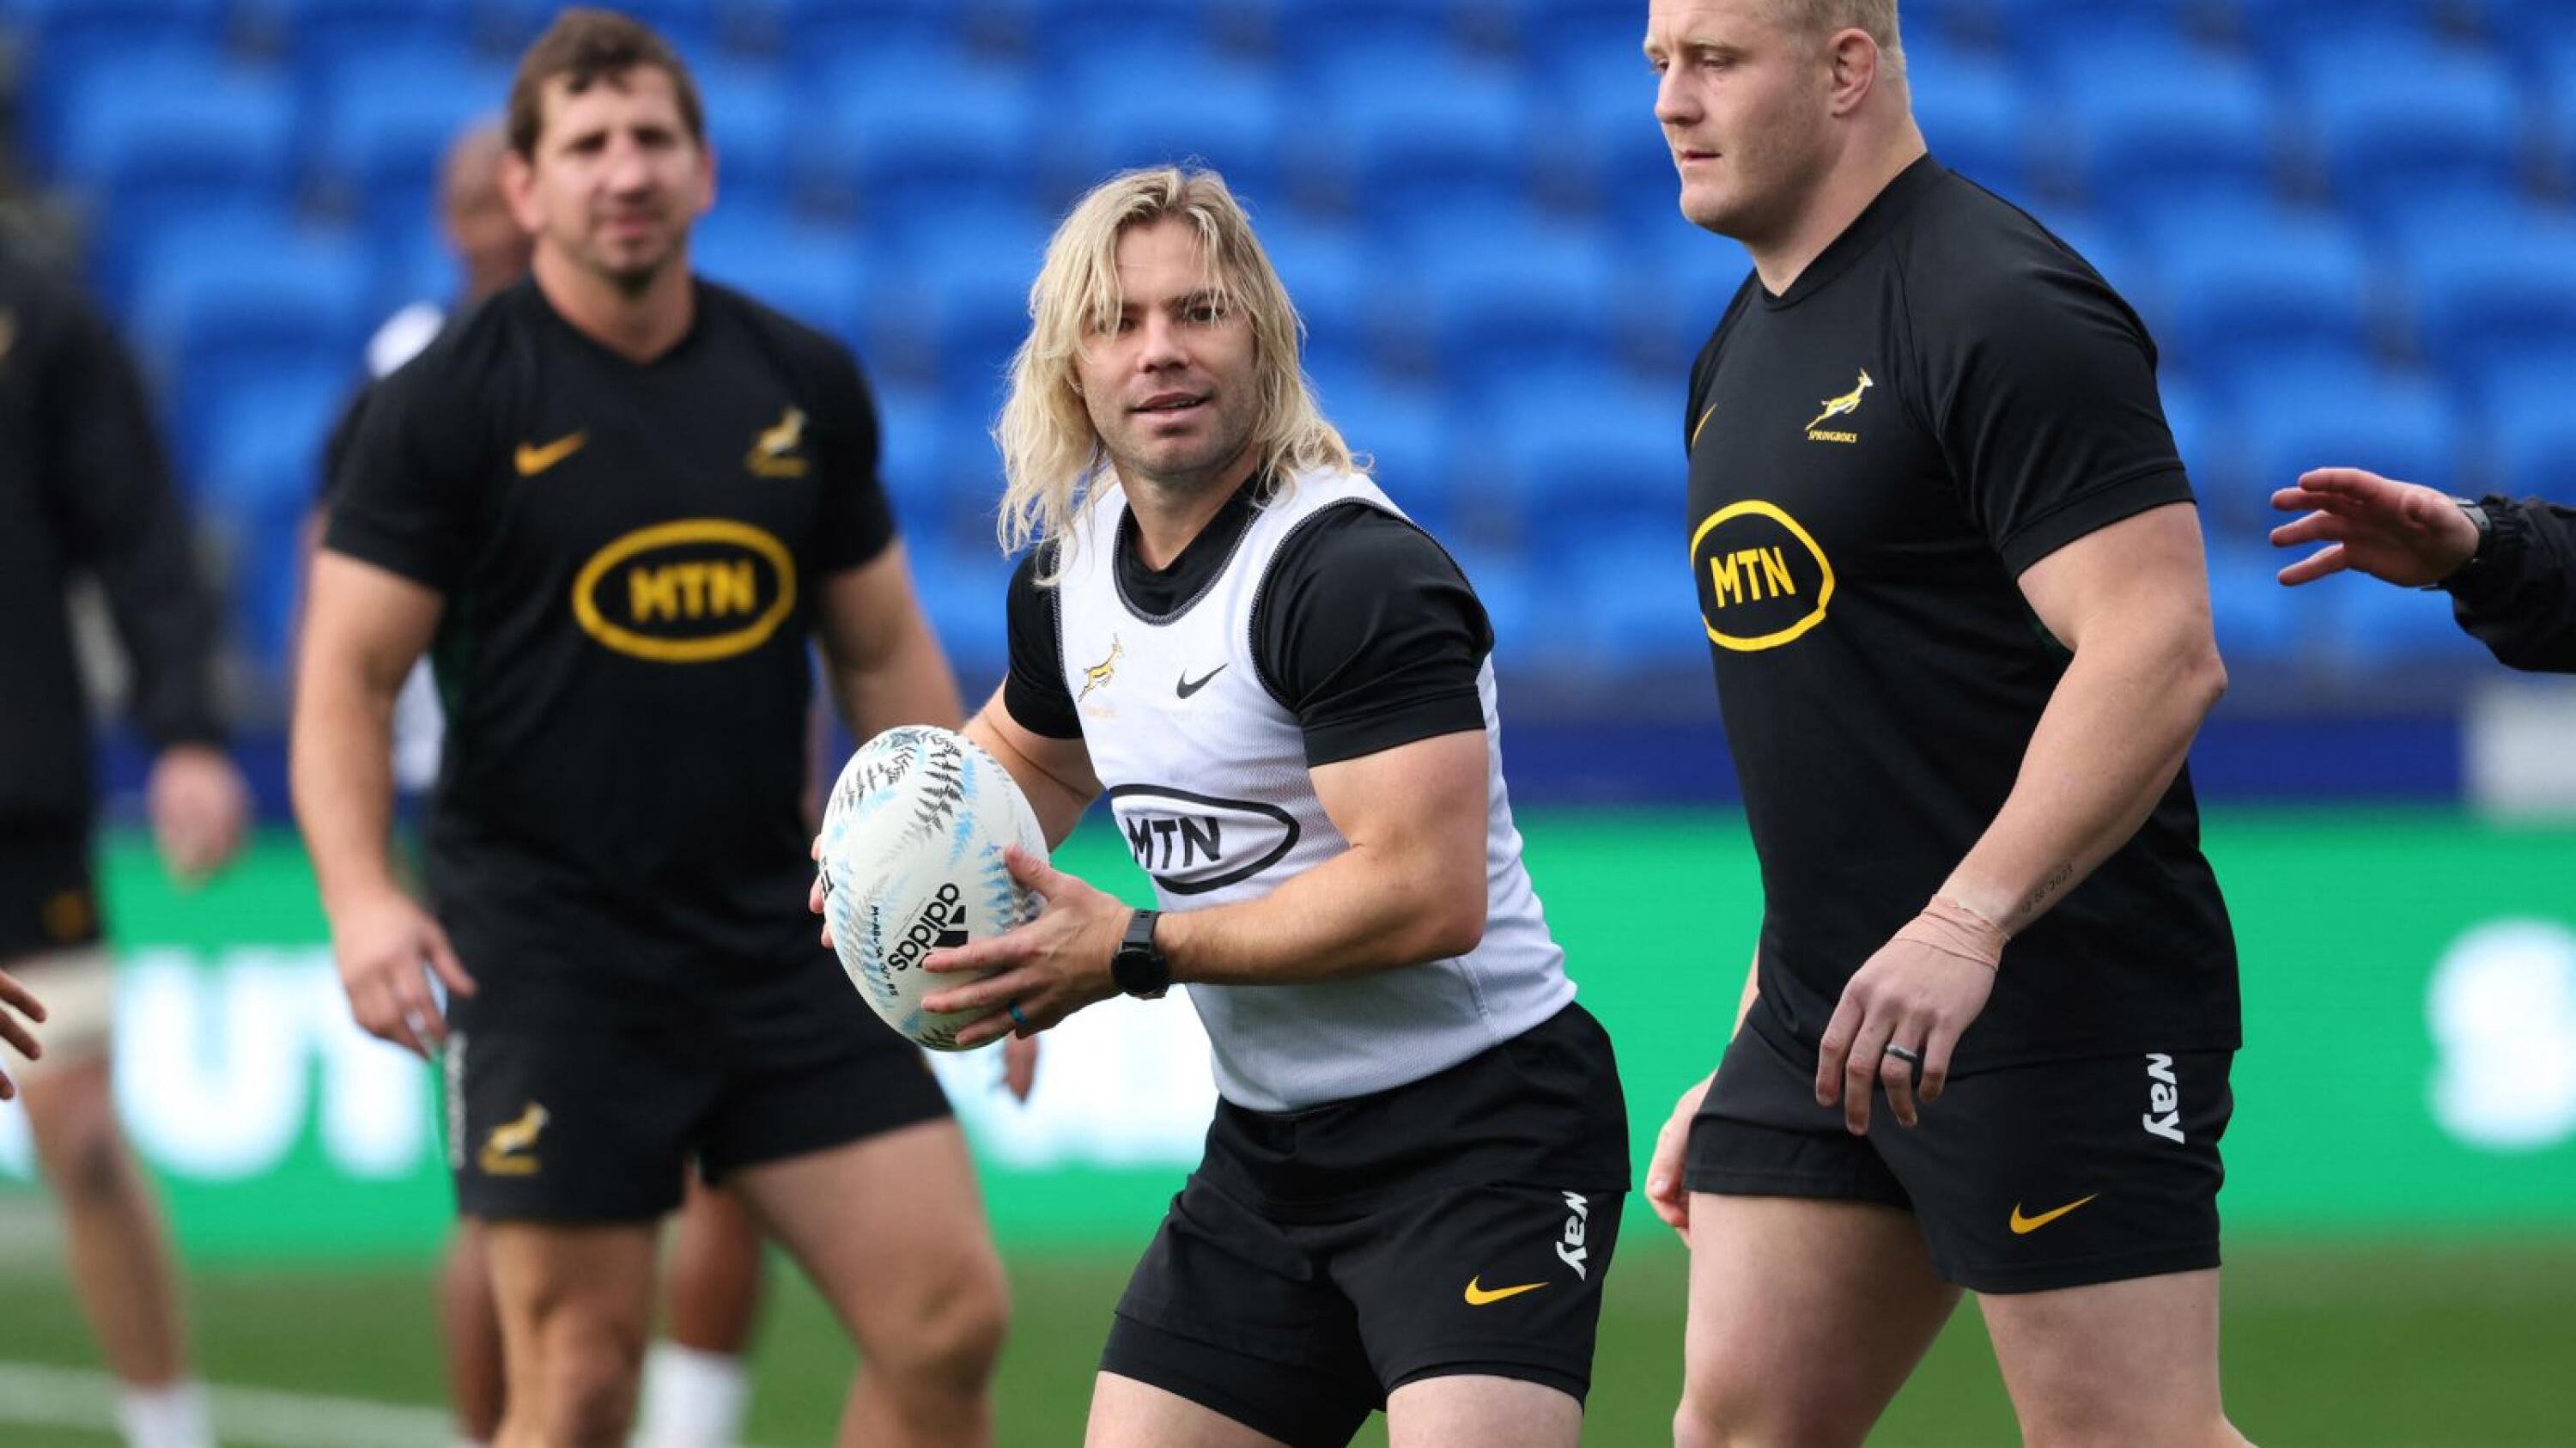 Faf de Klerk of South Africa takes part in the South Africa captain's run ahead of their rugby test match against New Zealand at Mt Smart in Auckland